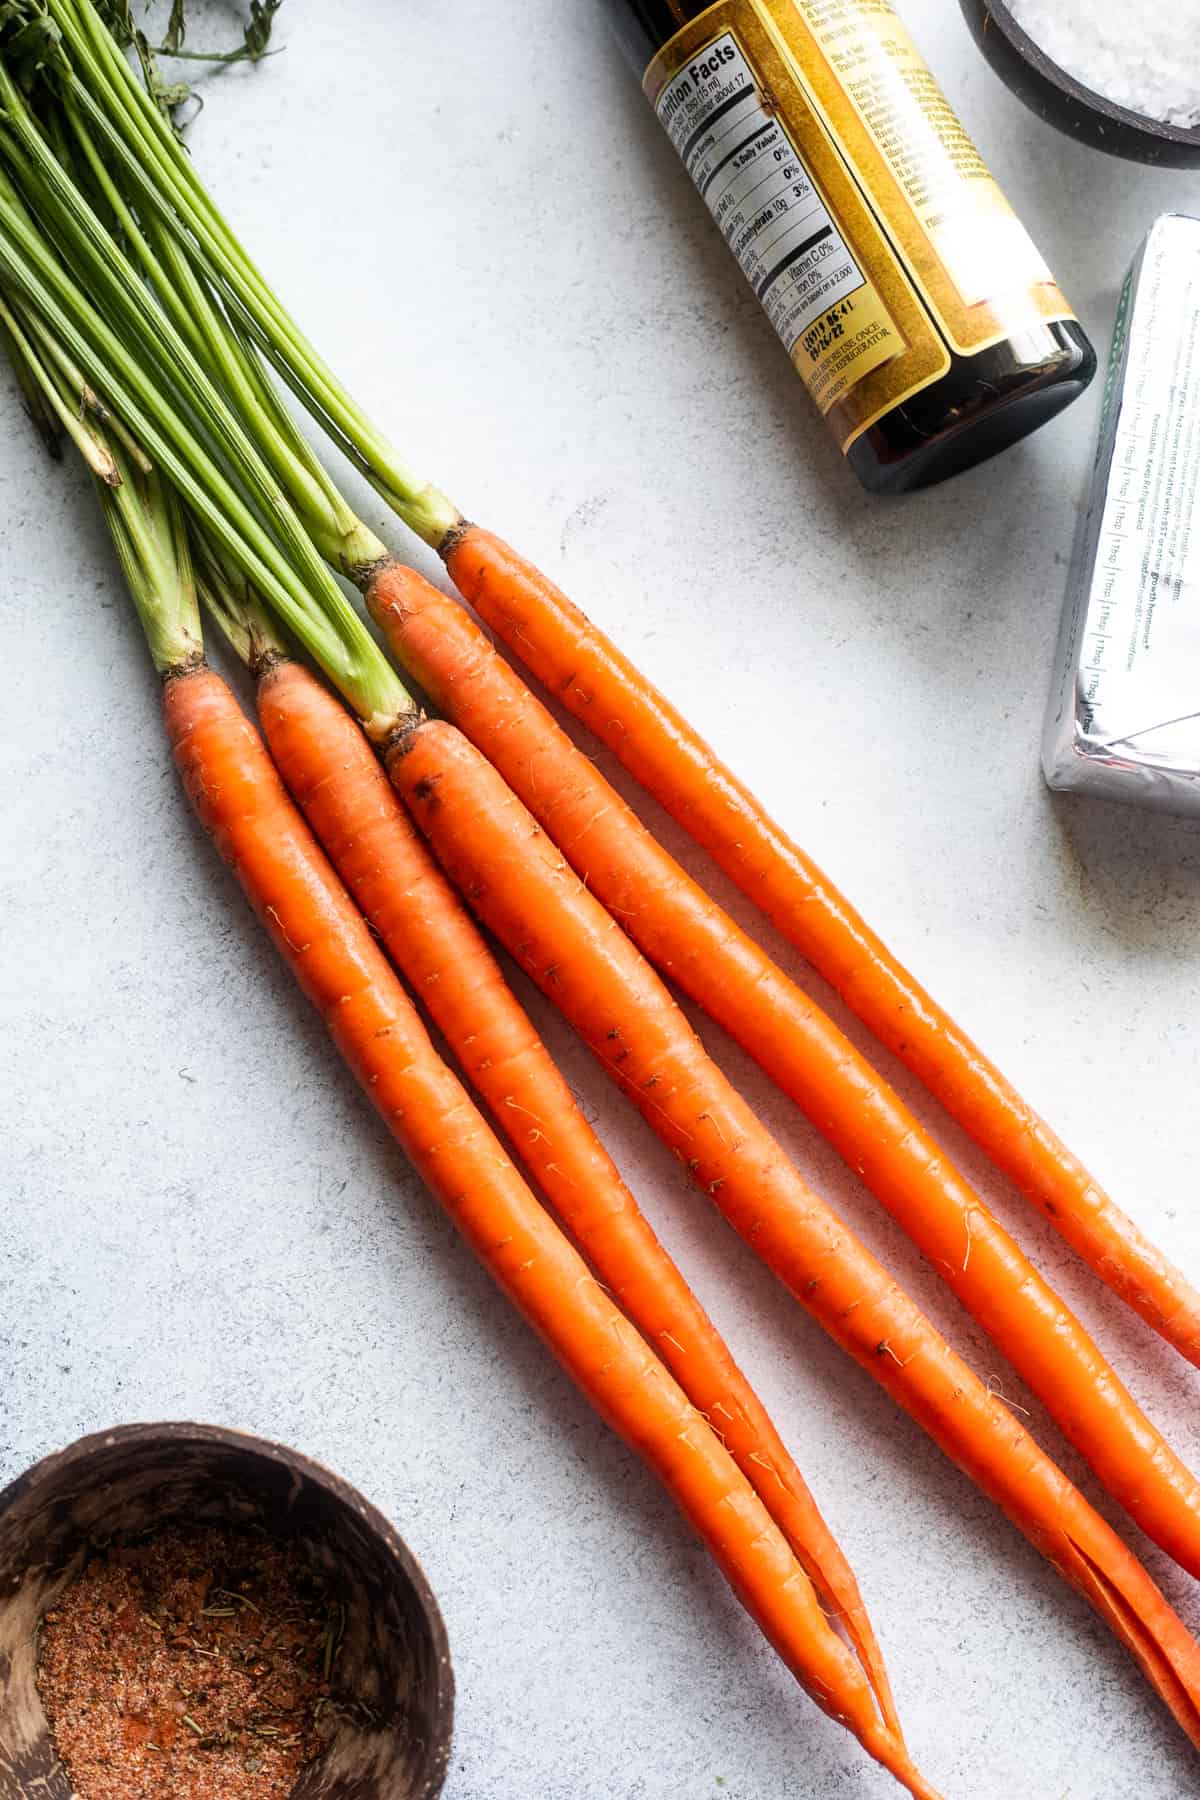 Give long carrots with green stalks arranged on a white background with balsamic vinegar and a seasonings mixture placed around the carrots.